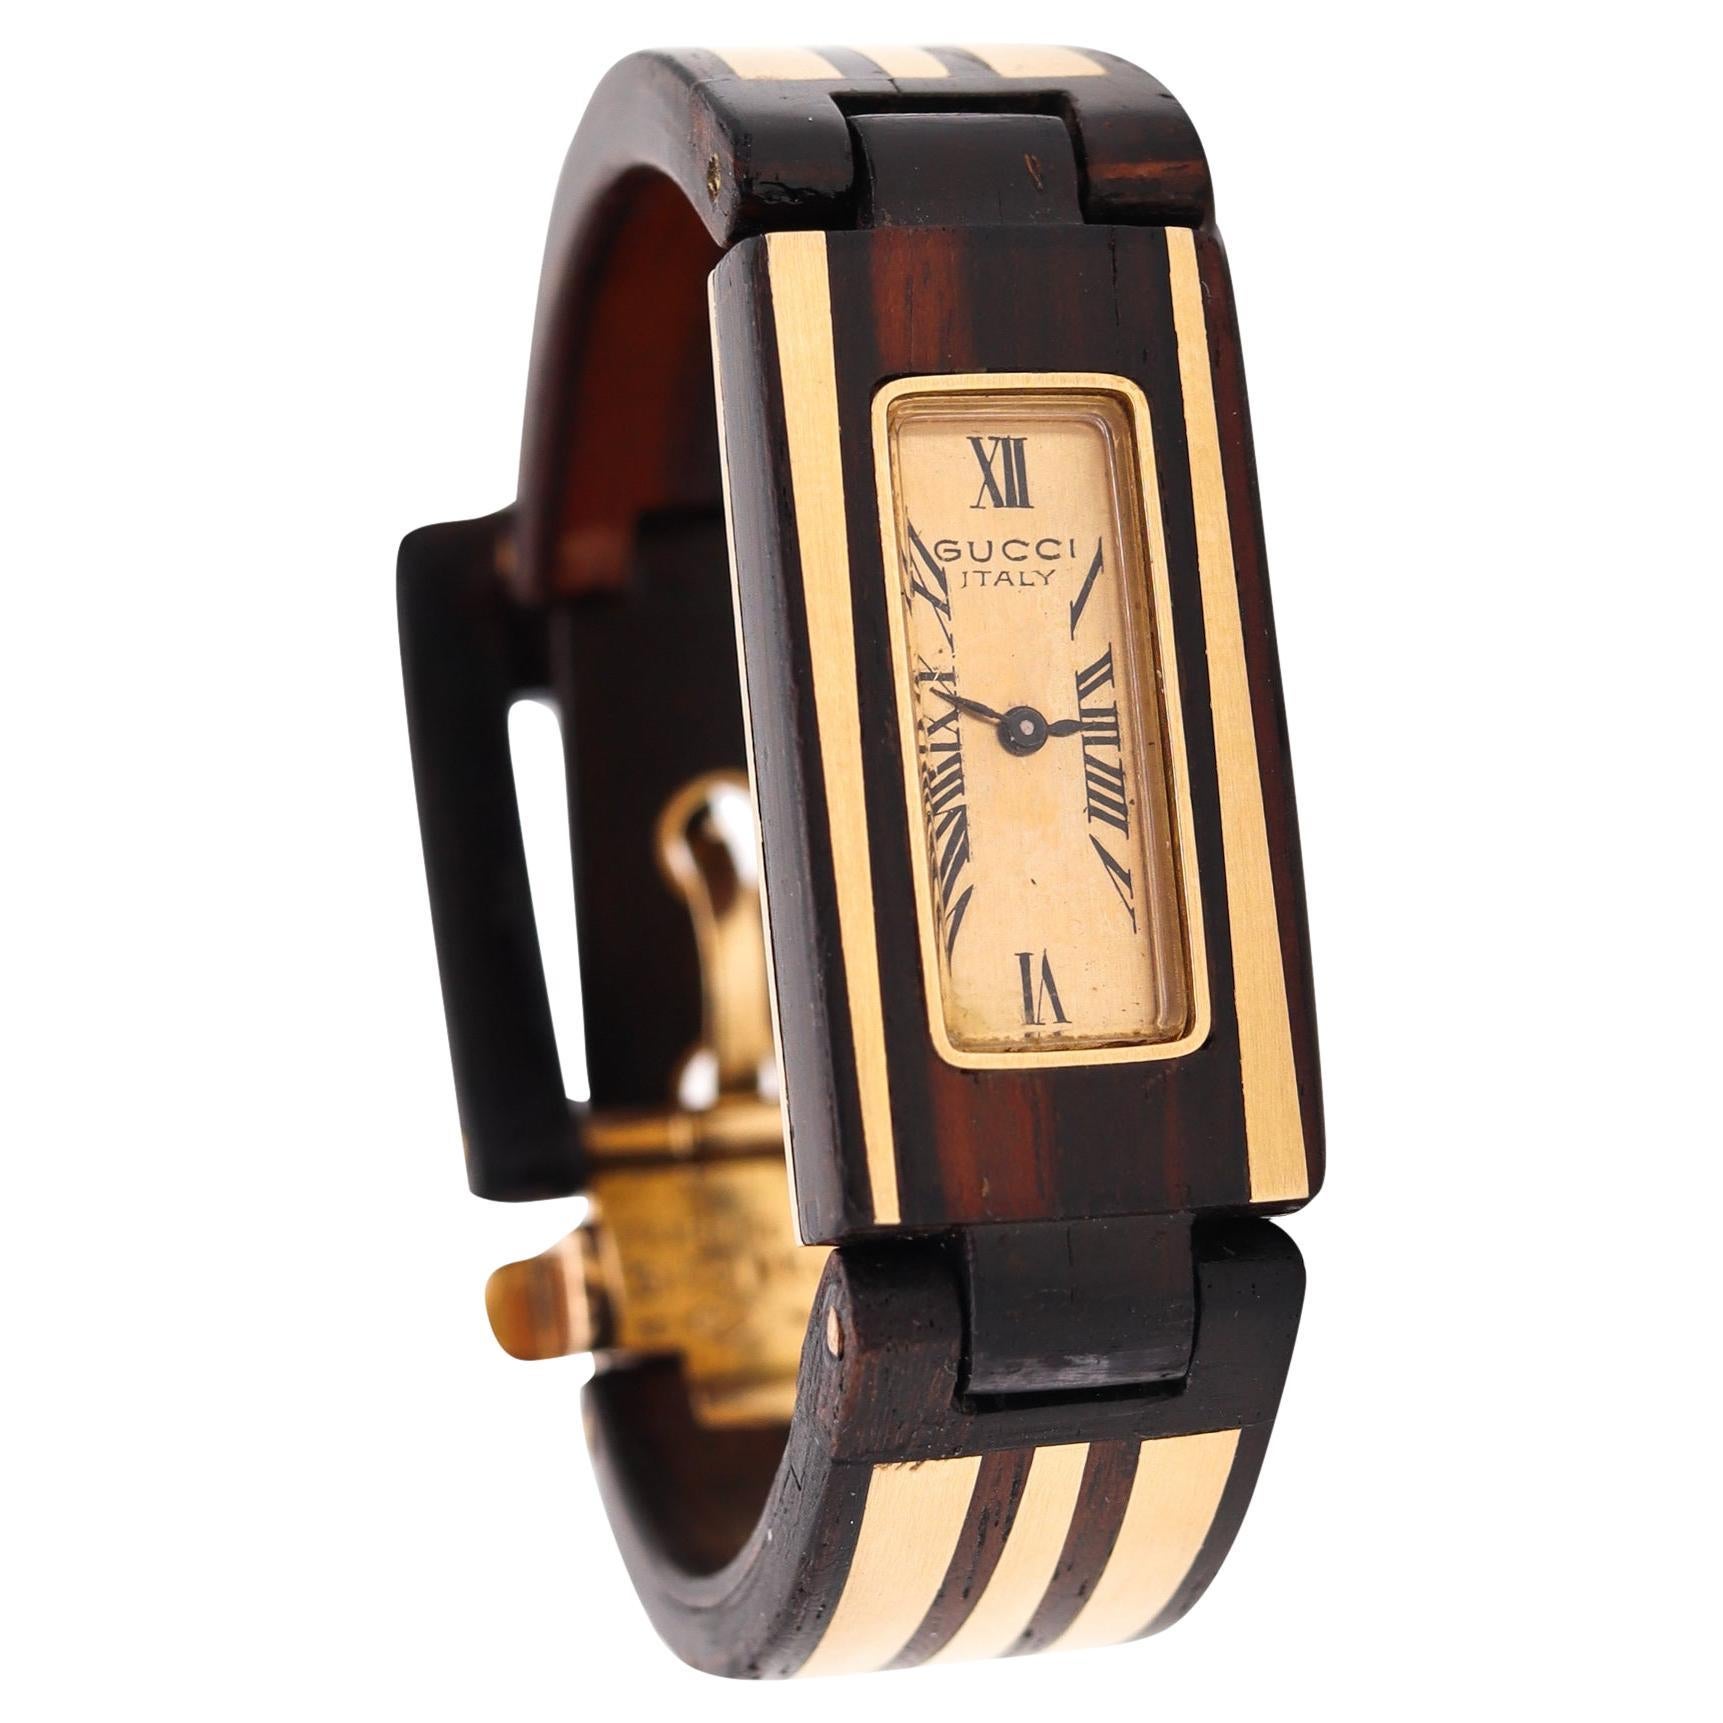 Gucci France 1968 Rare Buckle Bracelet Watch in Macassar Wood Inlaid of 18K Gold